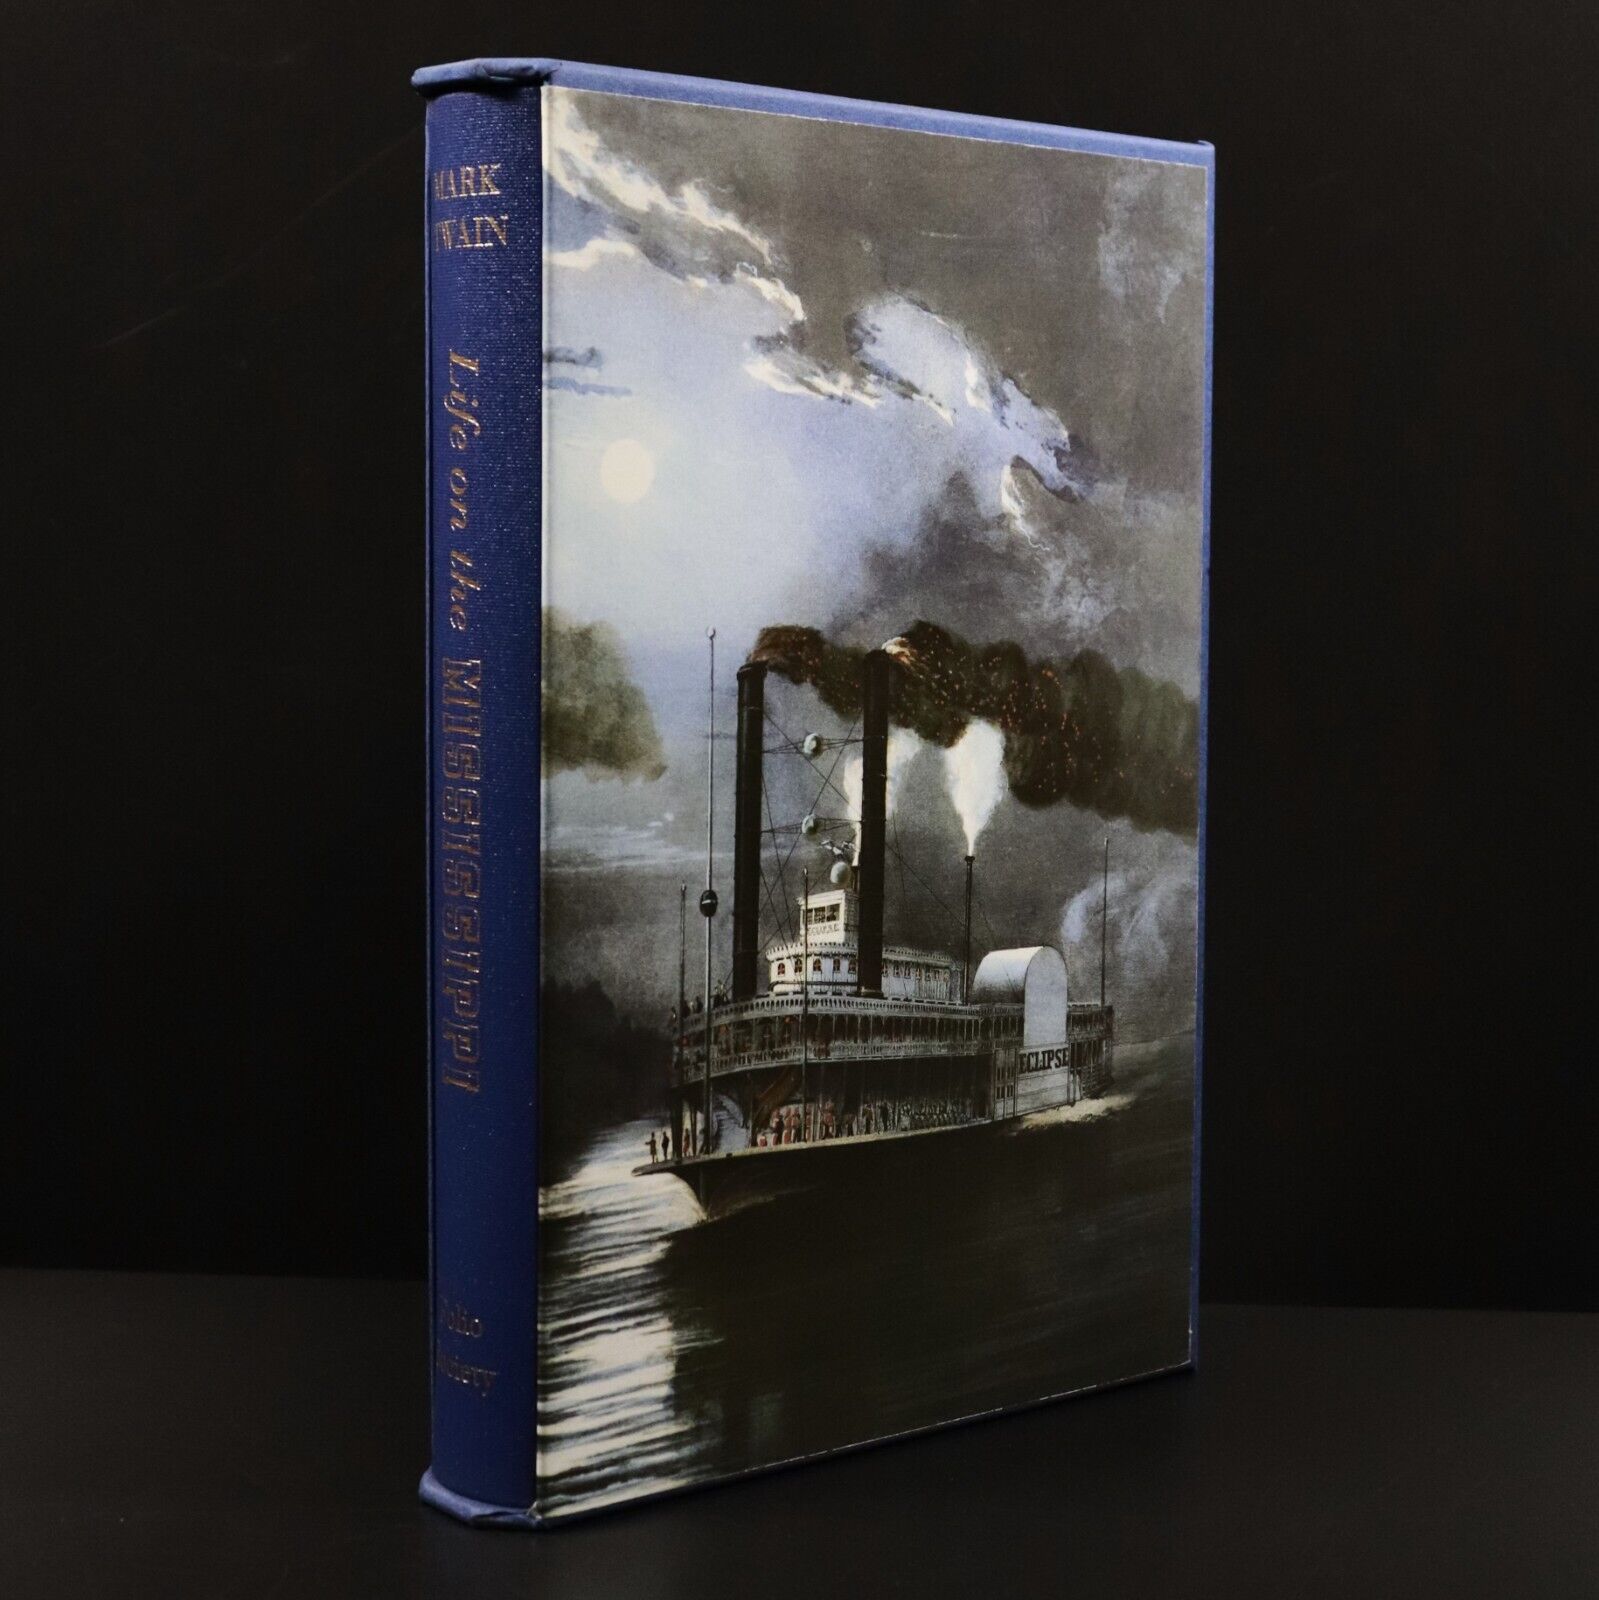 2006 Life On The Mississippi by Mark Twain Folio Society Classic Fiction Book